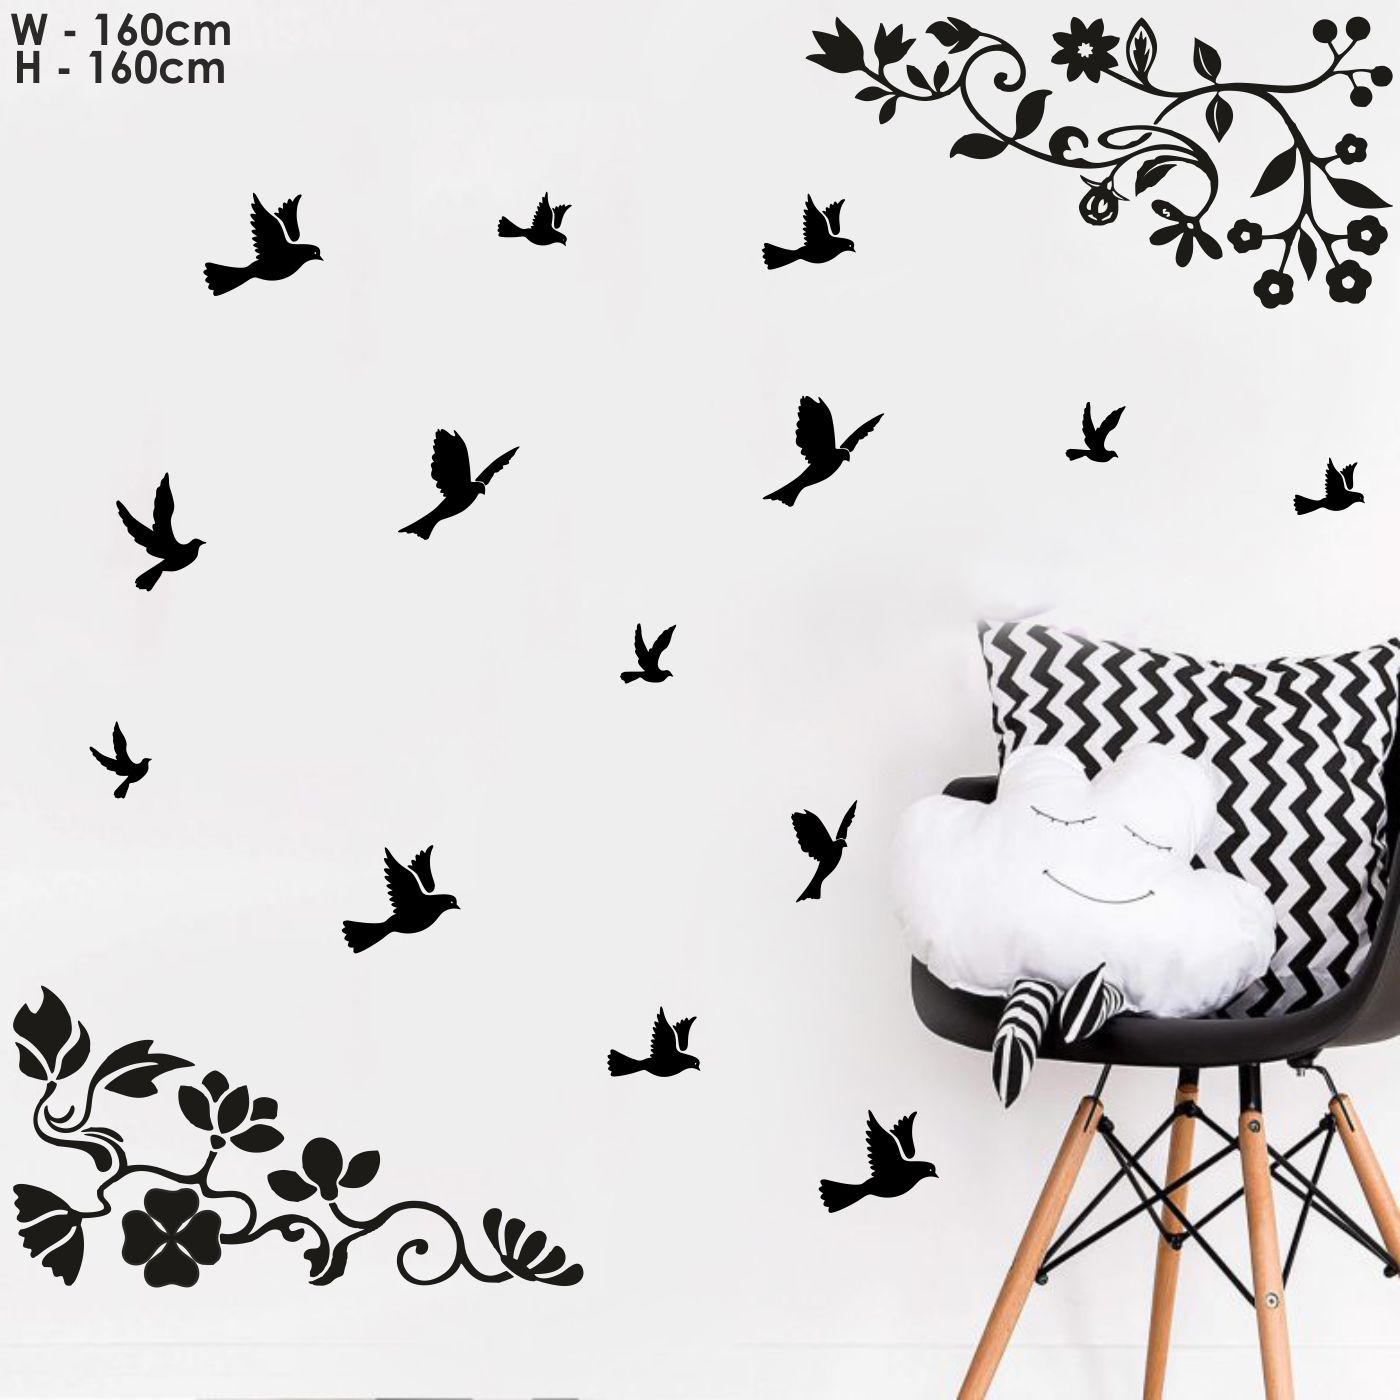 ORKA Butterfly Theme Wall Decal Sticker 9  